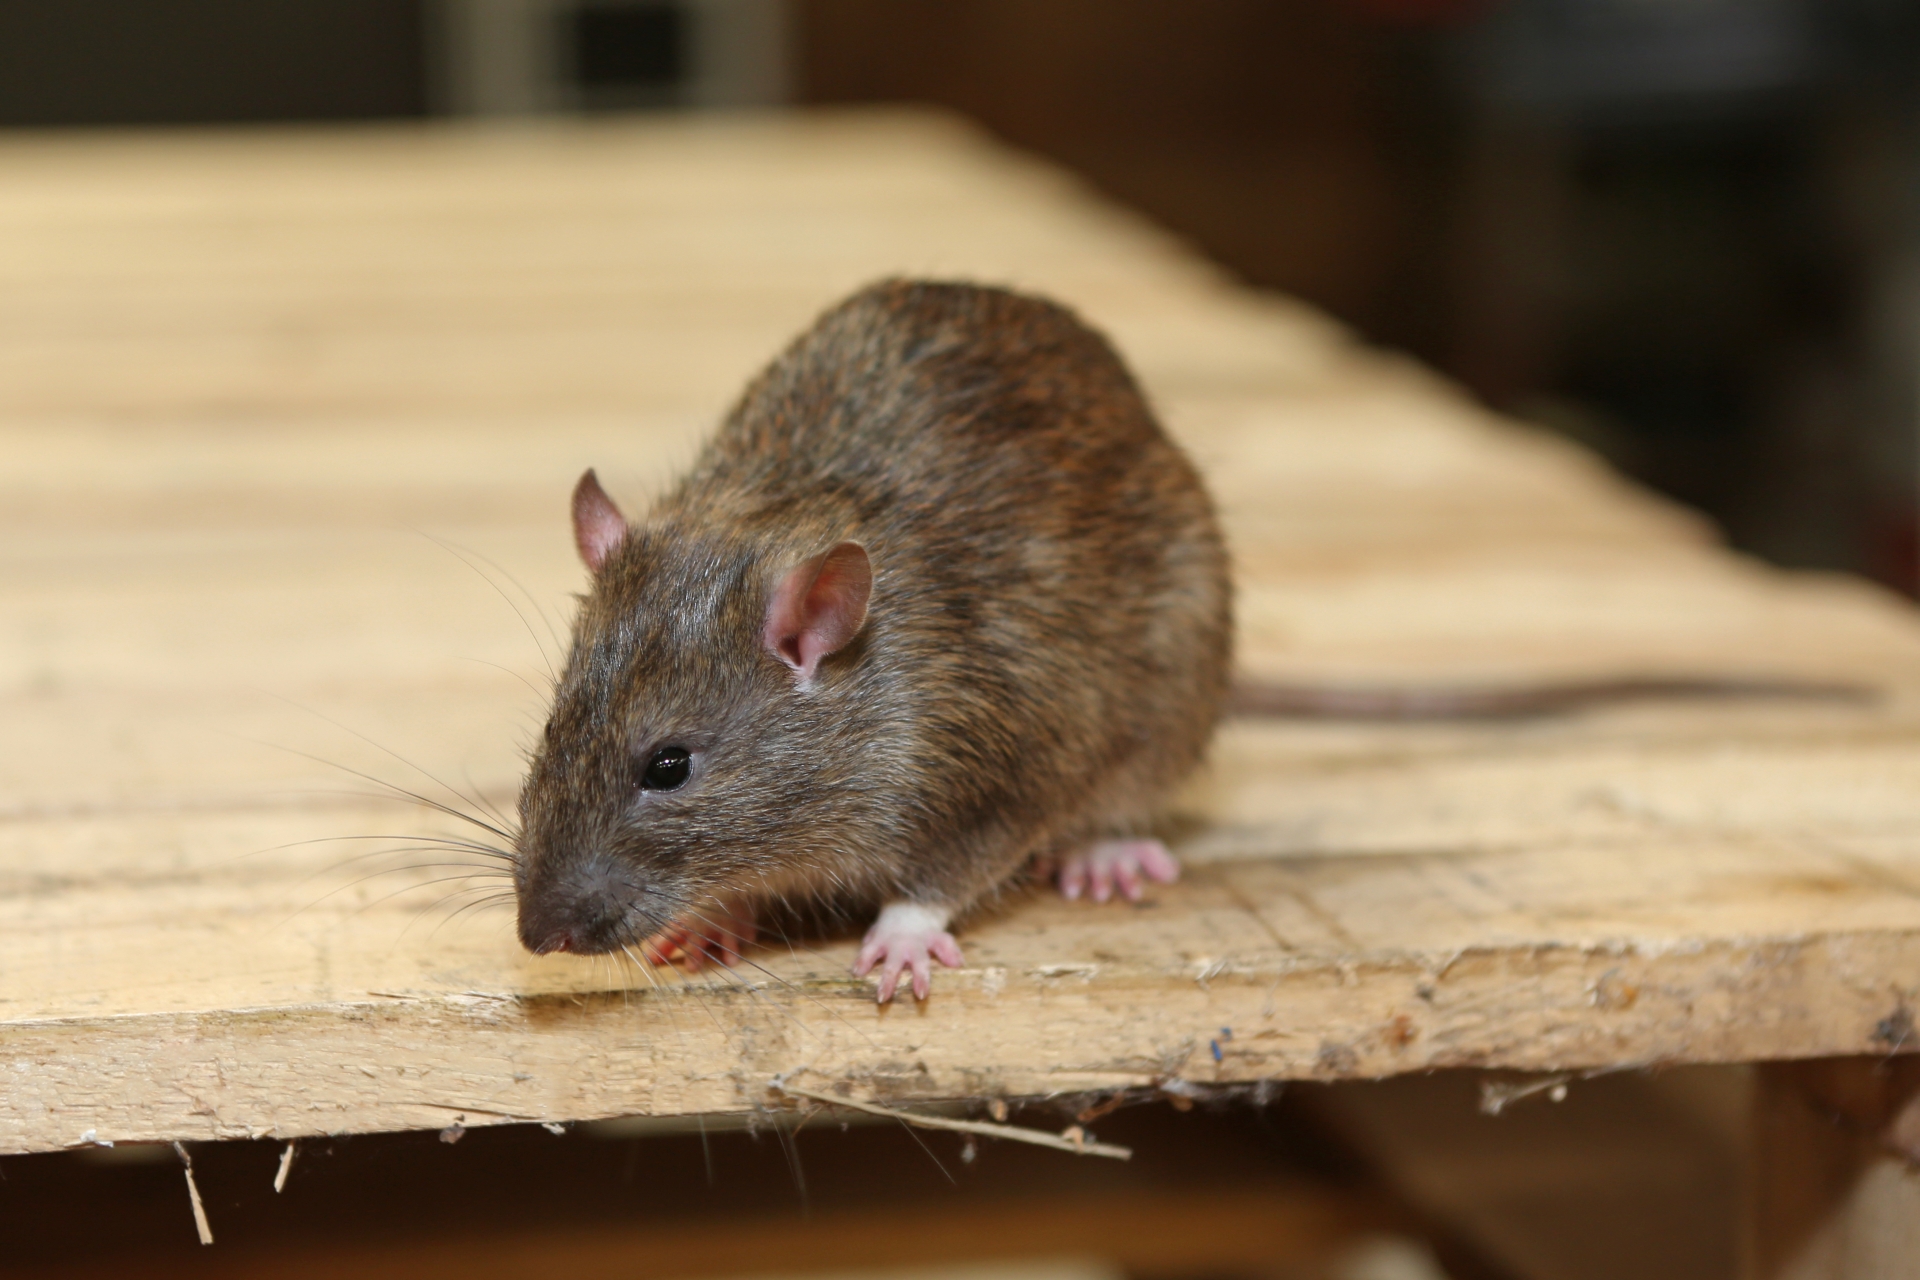 Rat extermination, Pest Control in Bloomsbury, Gray's Inn, WC1. Call Now 020 8166 9746